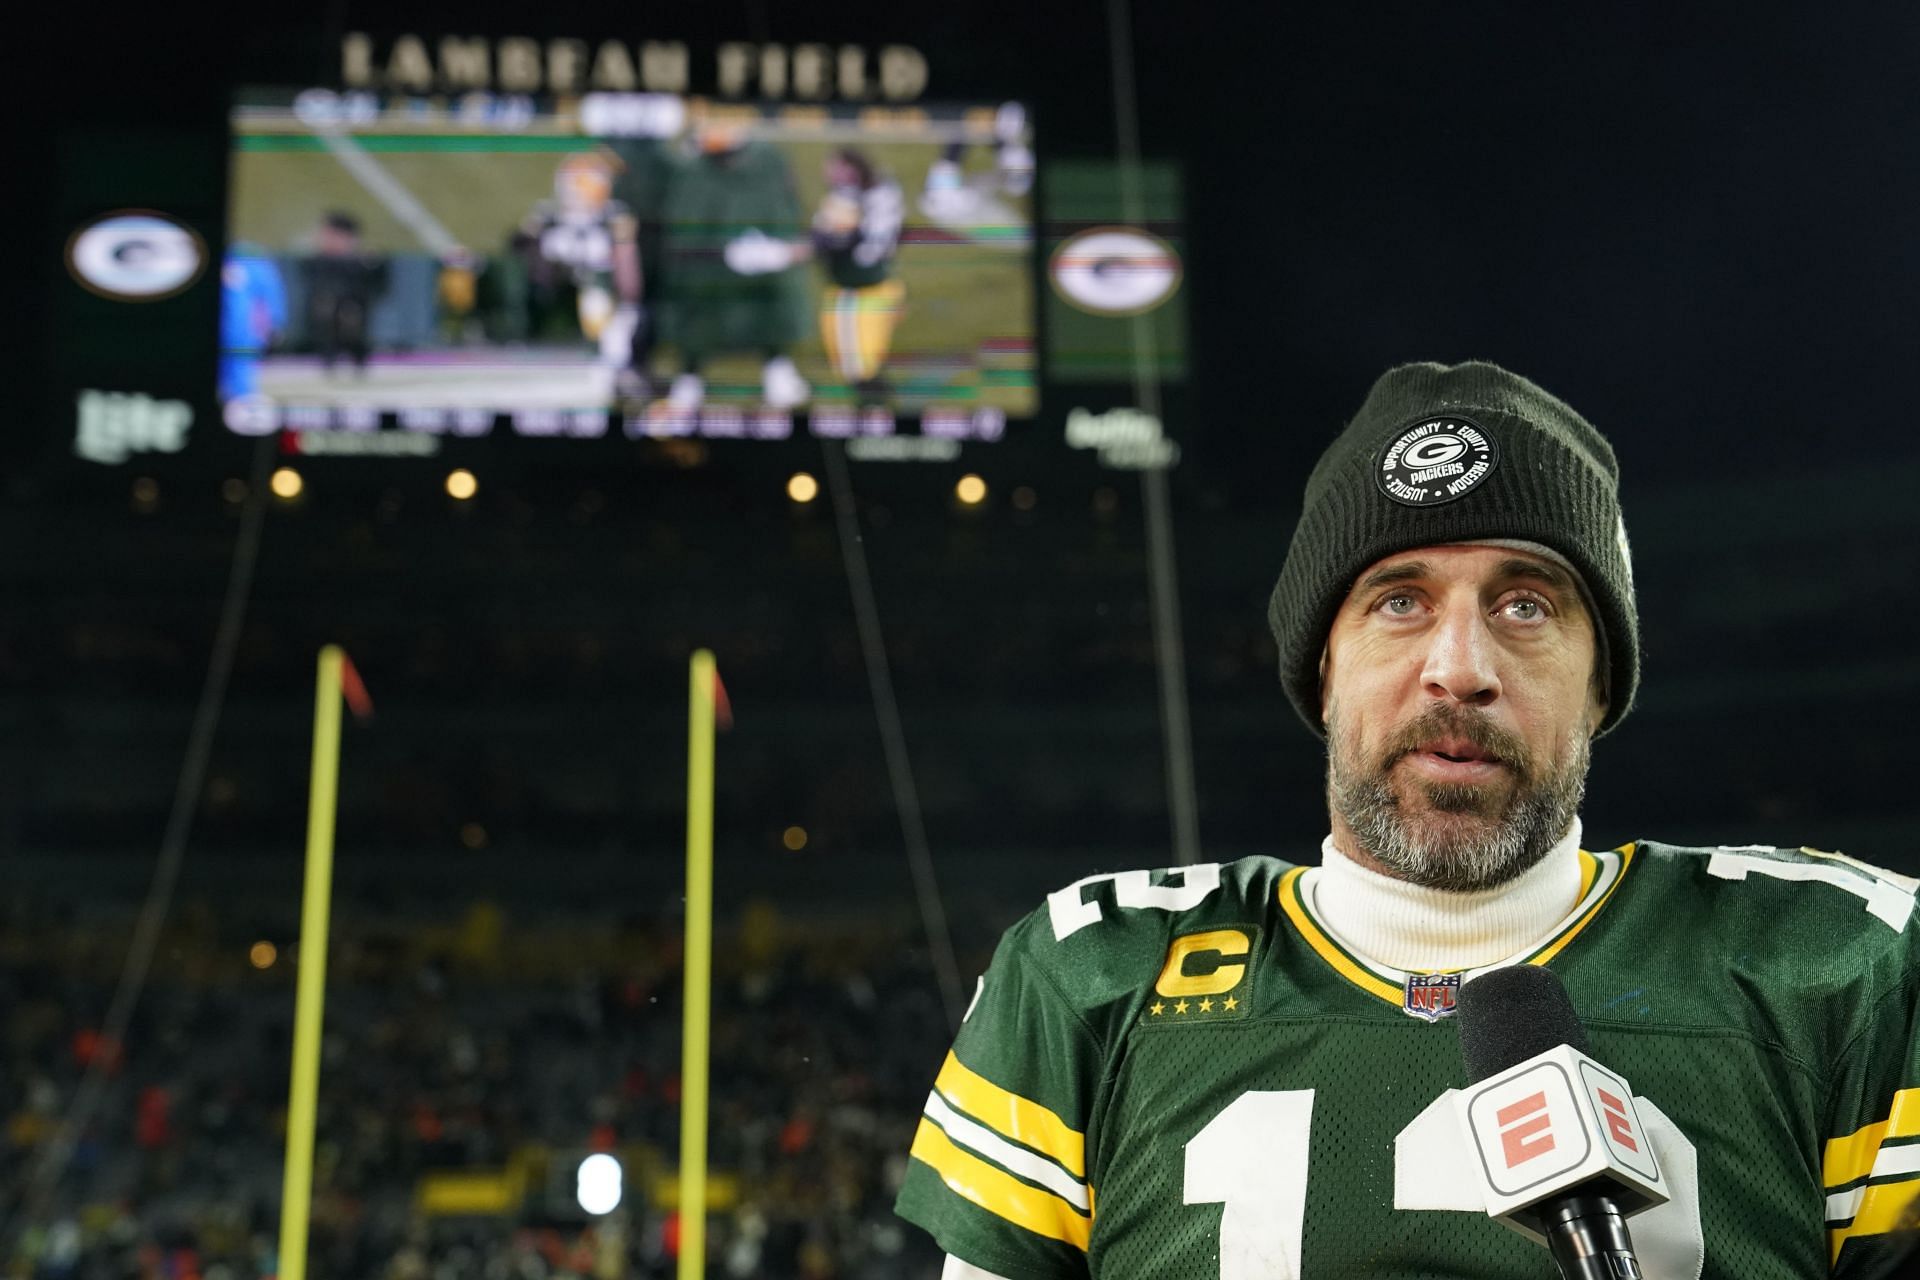 Aaron Rodgers: Los Angeles Rams v Green Bay Packers